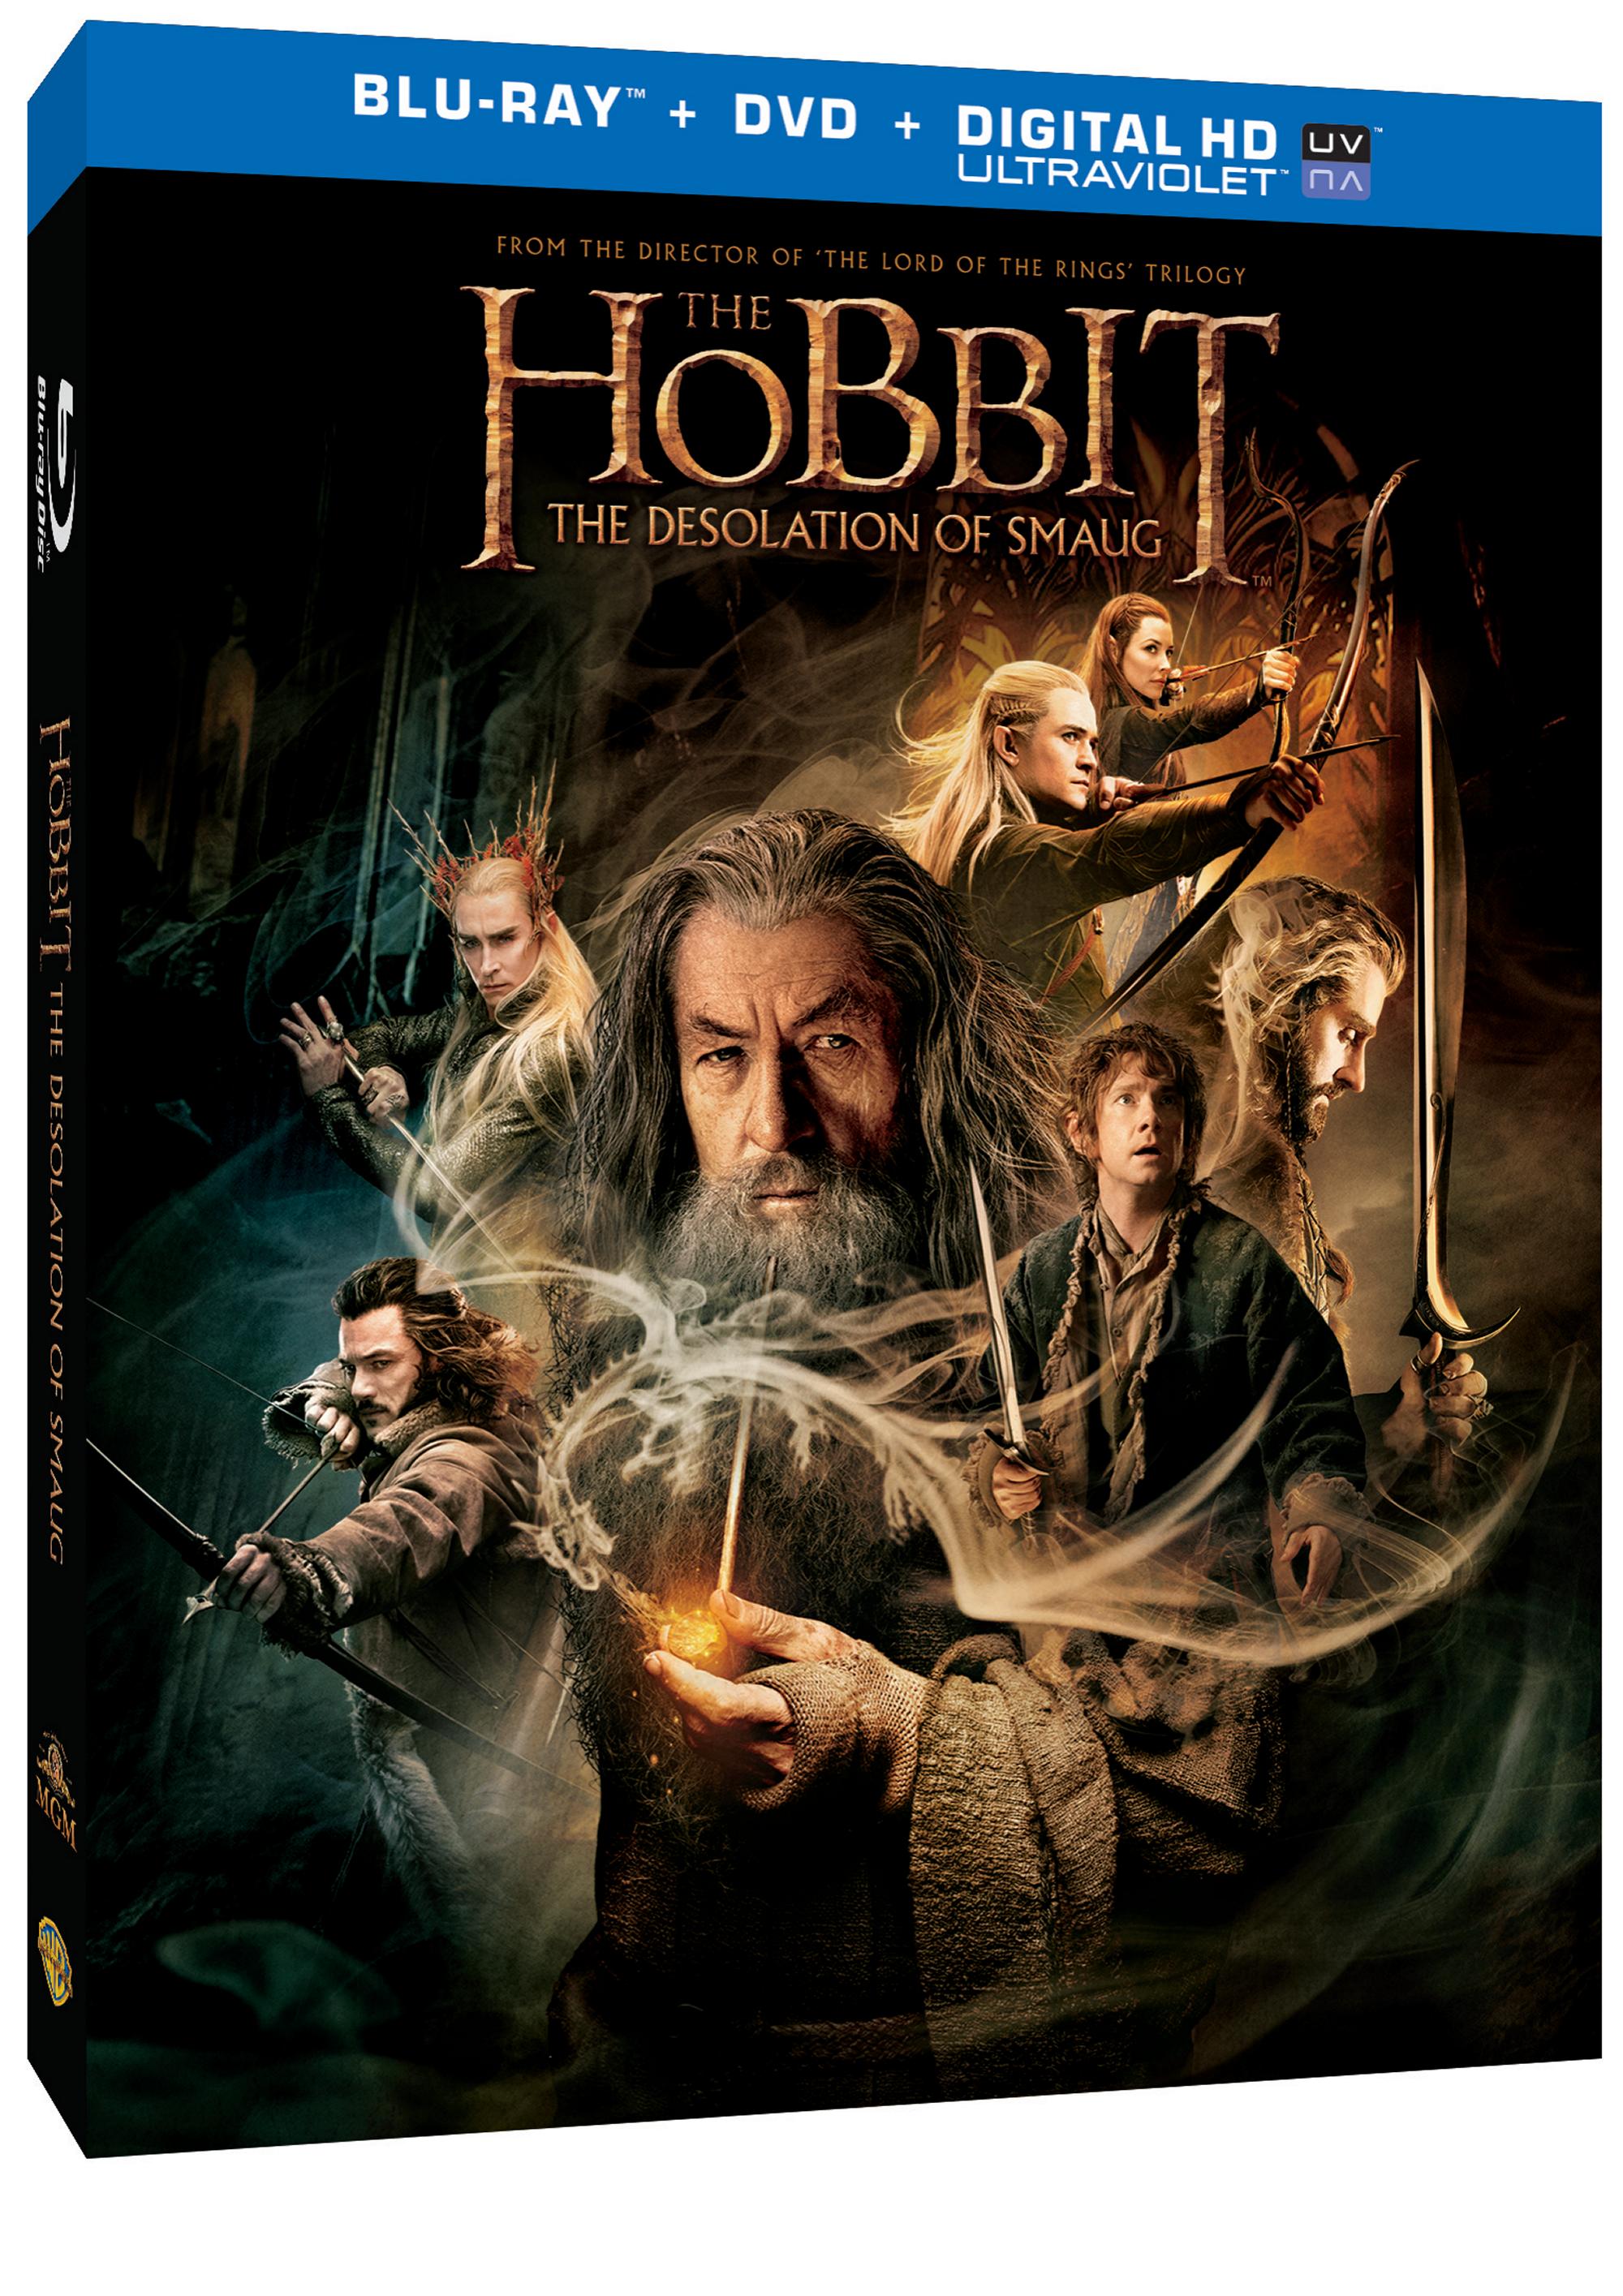 The Hobbit The Desolation of Smaug Blu-ray Review